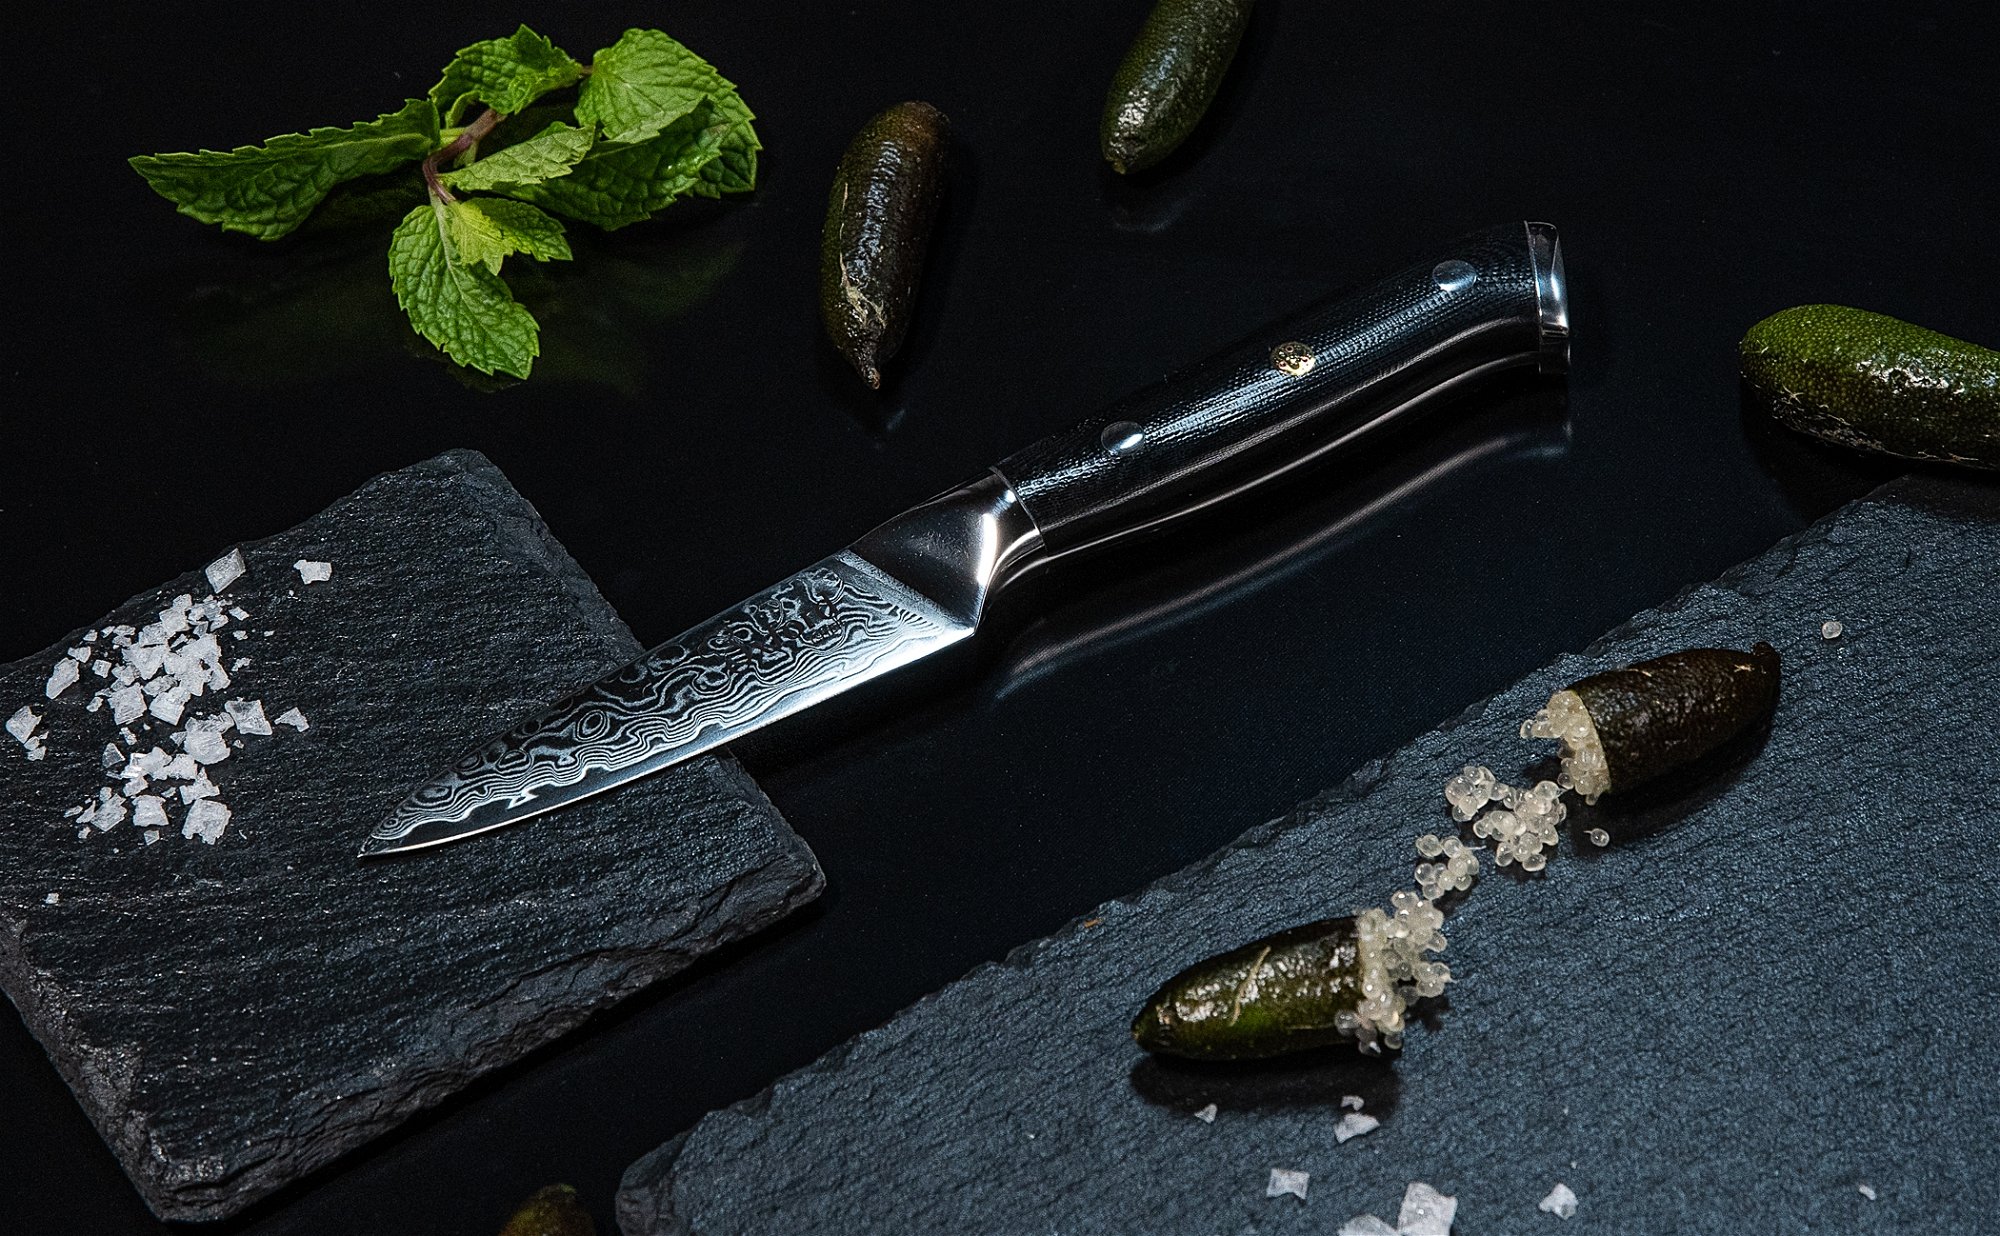 oFuun Paring Knife, 5 Inch Japanese Kitchen Knife, VG-10 Damascus High  Carbon Stainless Steel Knife for Fruit and Vegetable Cutting Chef Knives